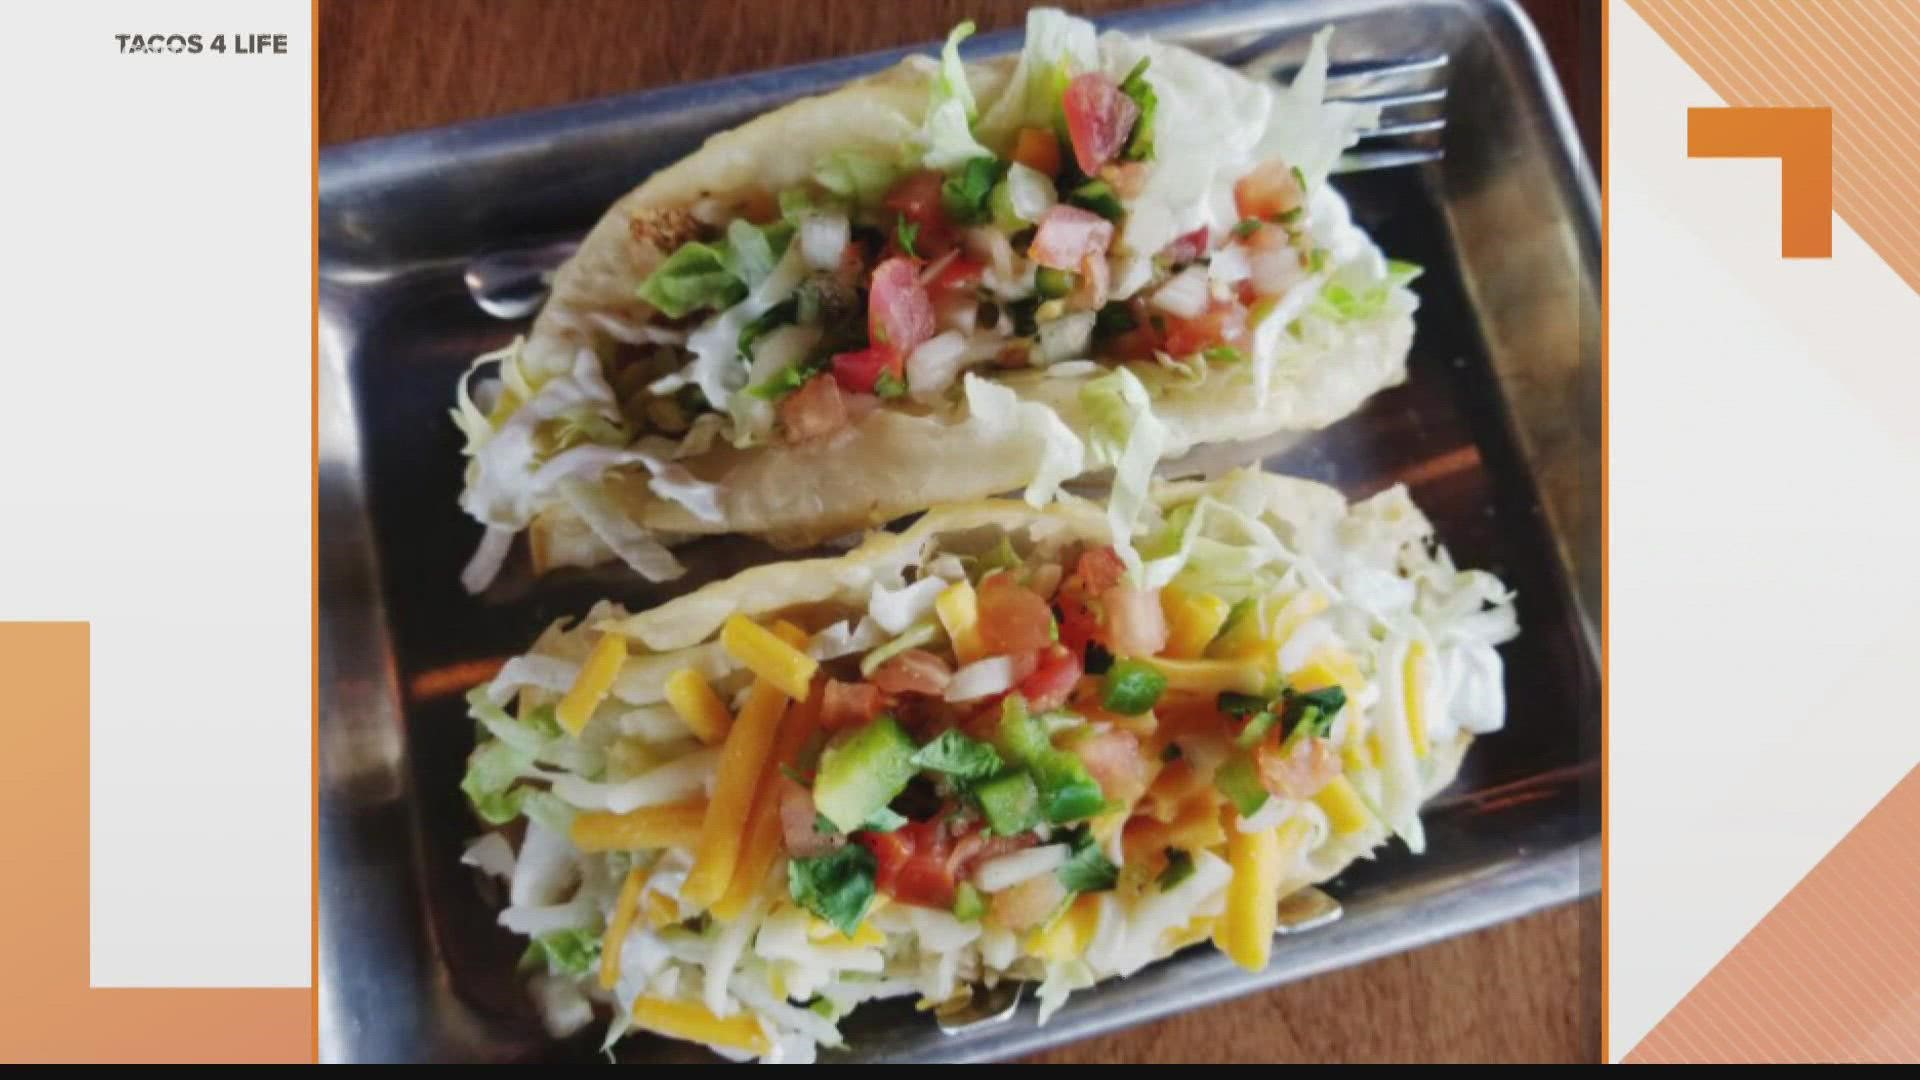 Tacos 4 Life opened its first Missouri location in O'Fallon, Missouri. The restaurant has a drive-thru and enough inside seating for 114 people.